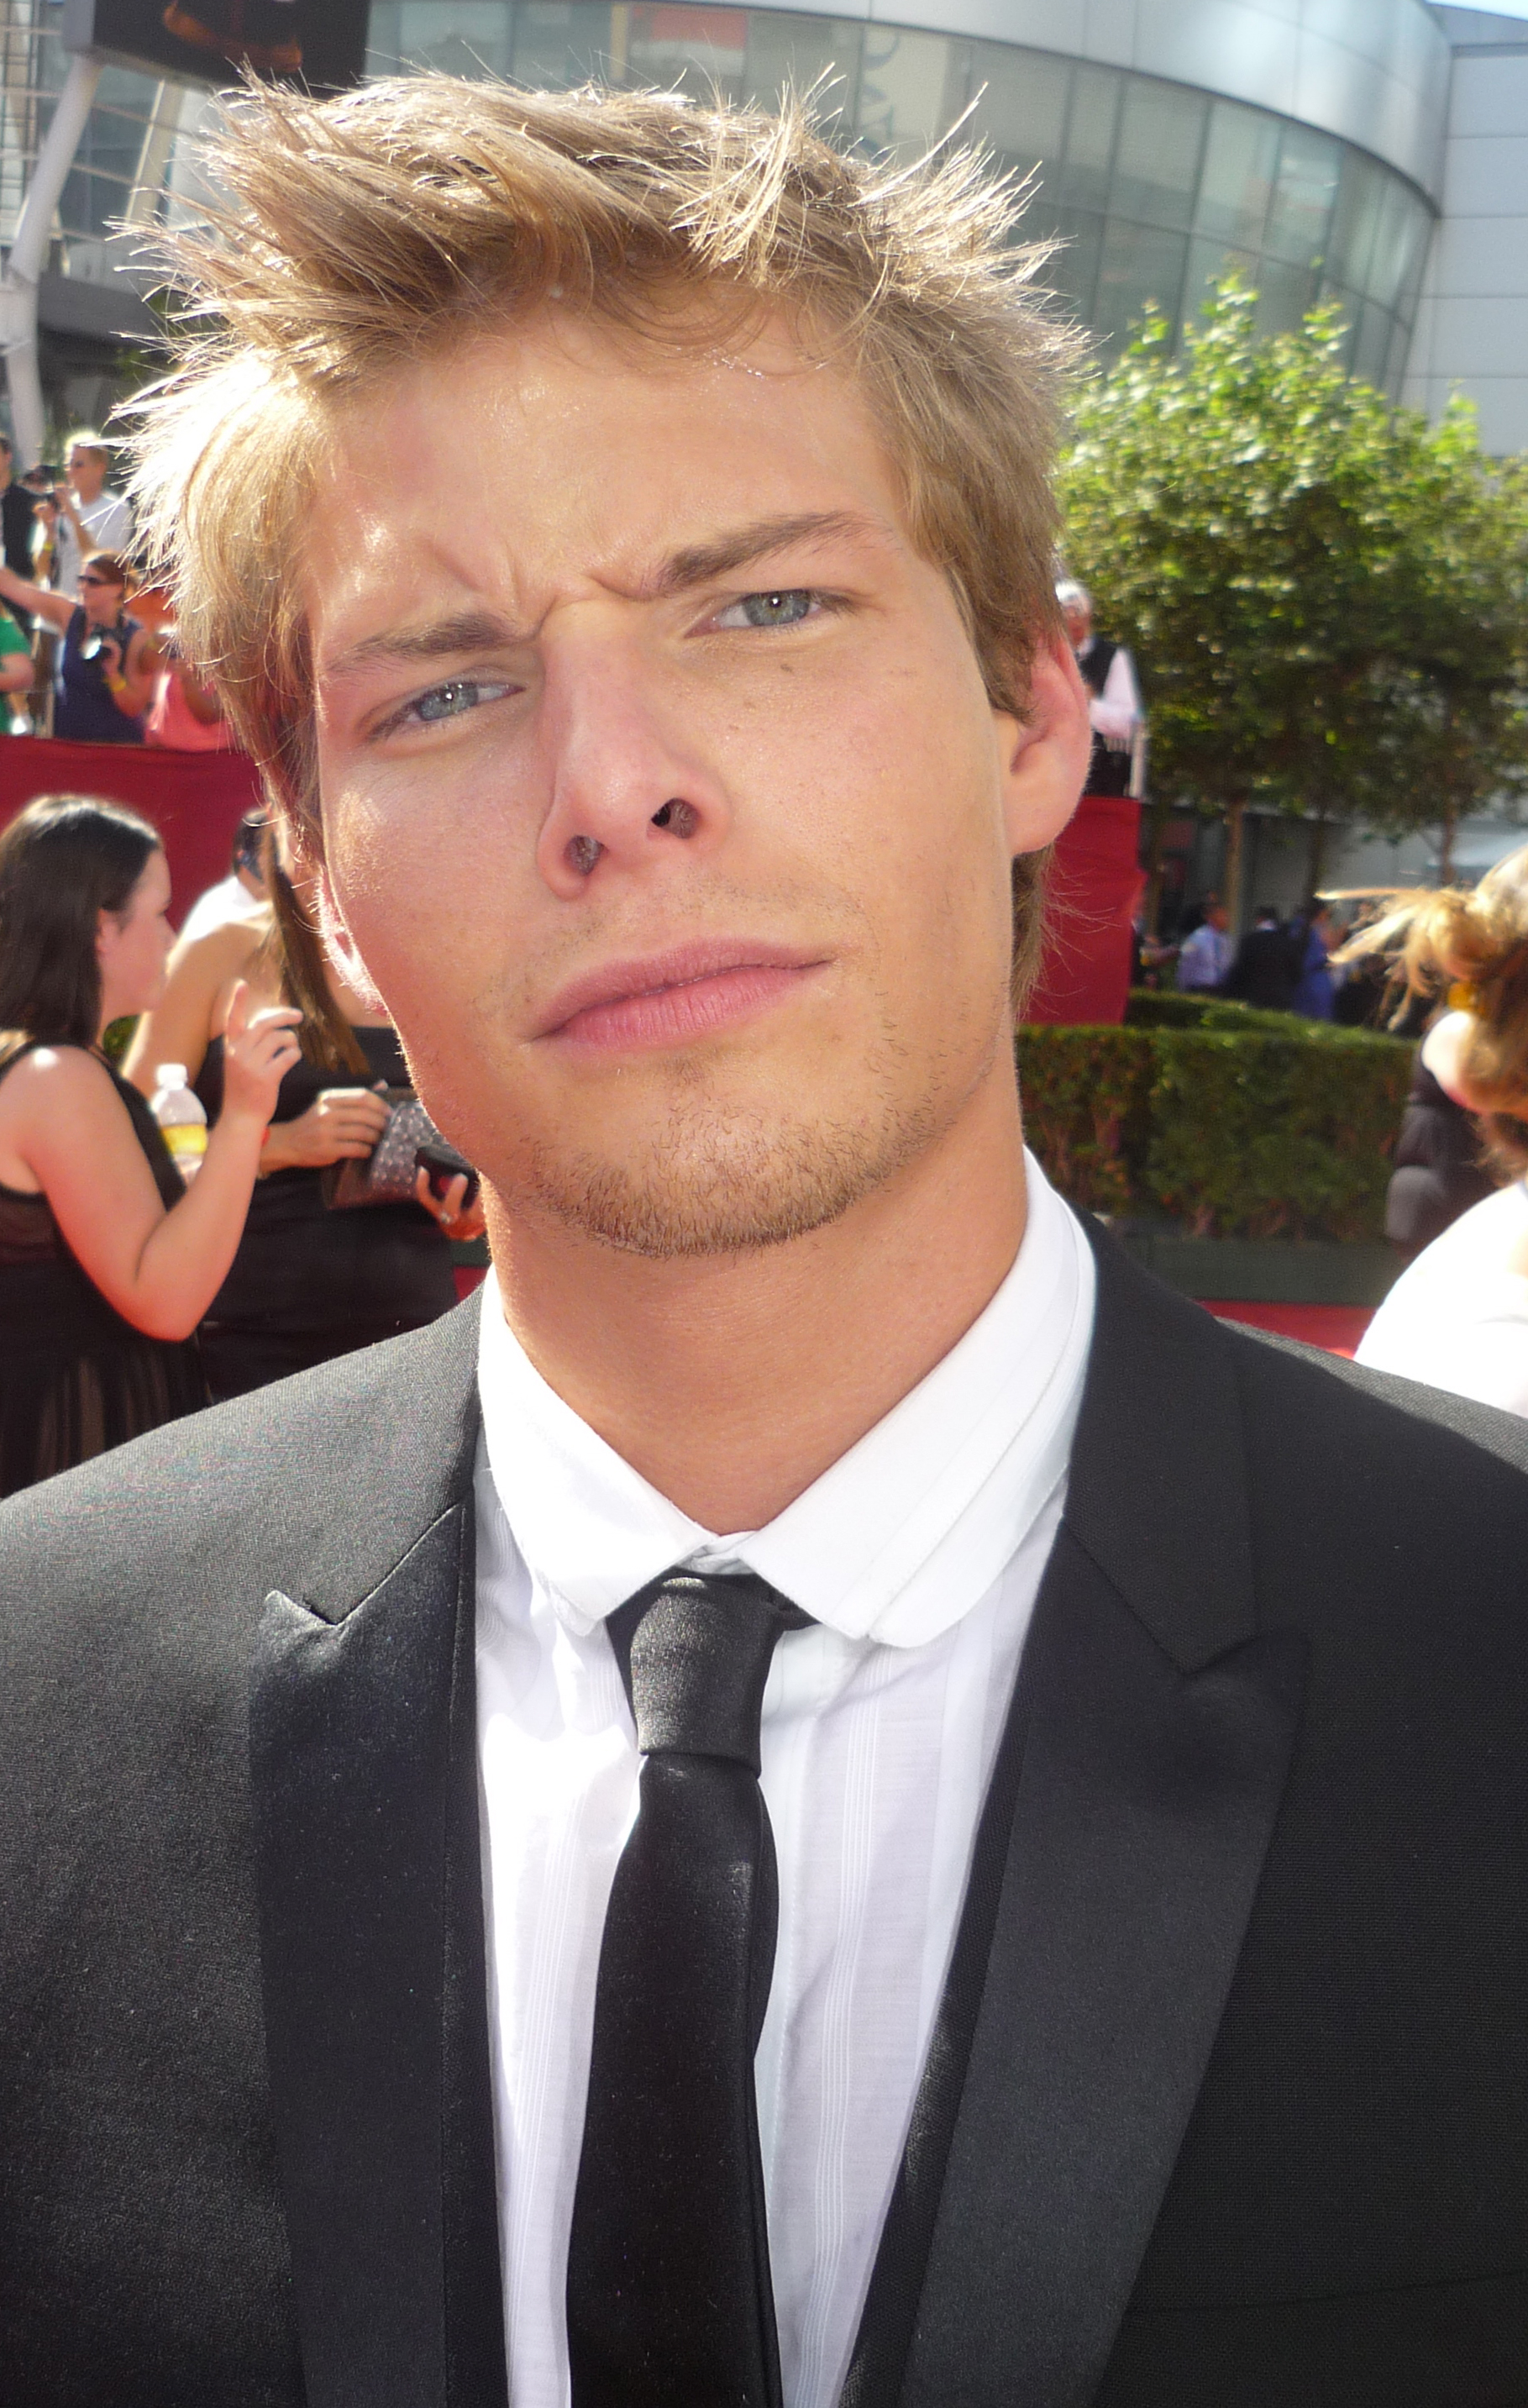 Hunter Parrish to play lead character in 'Jane the Virgin' first season